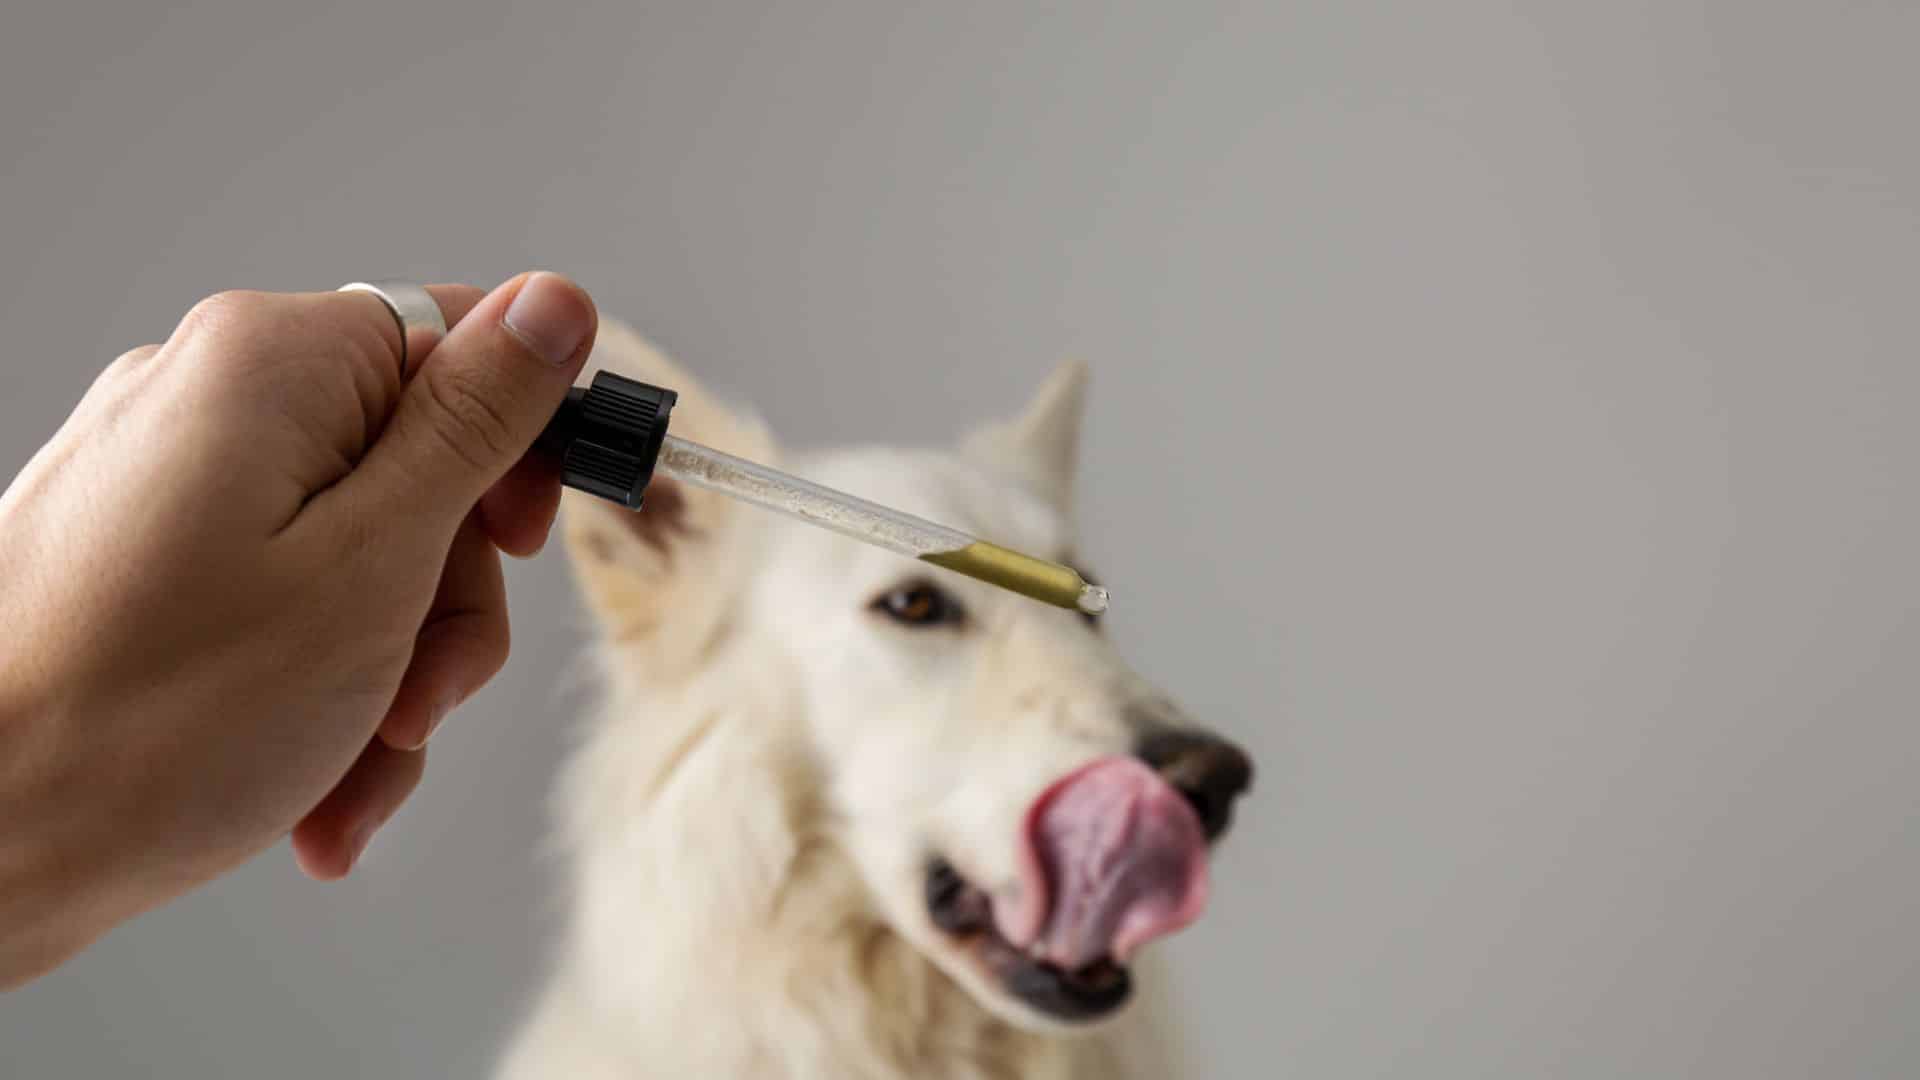 Potential Health Benefits of CBD Oil For Dogs